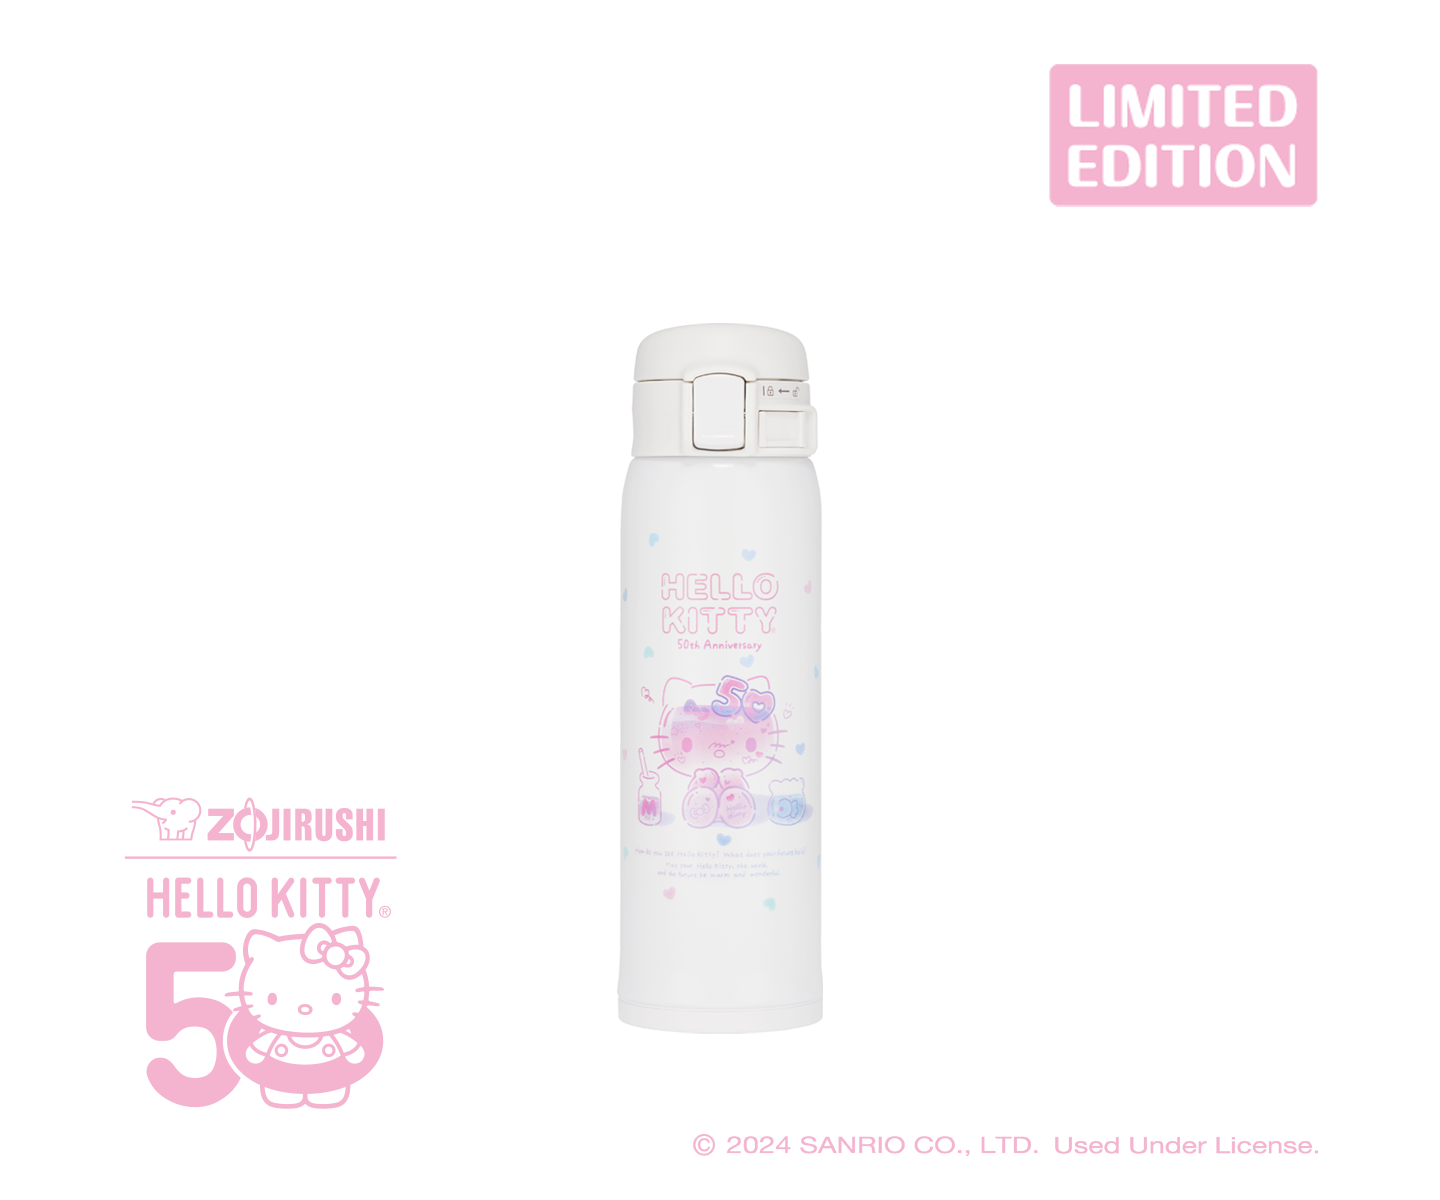 Hello Kitty 50th Anniversary Limited Edition Stainless Mug SM-SF48KT